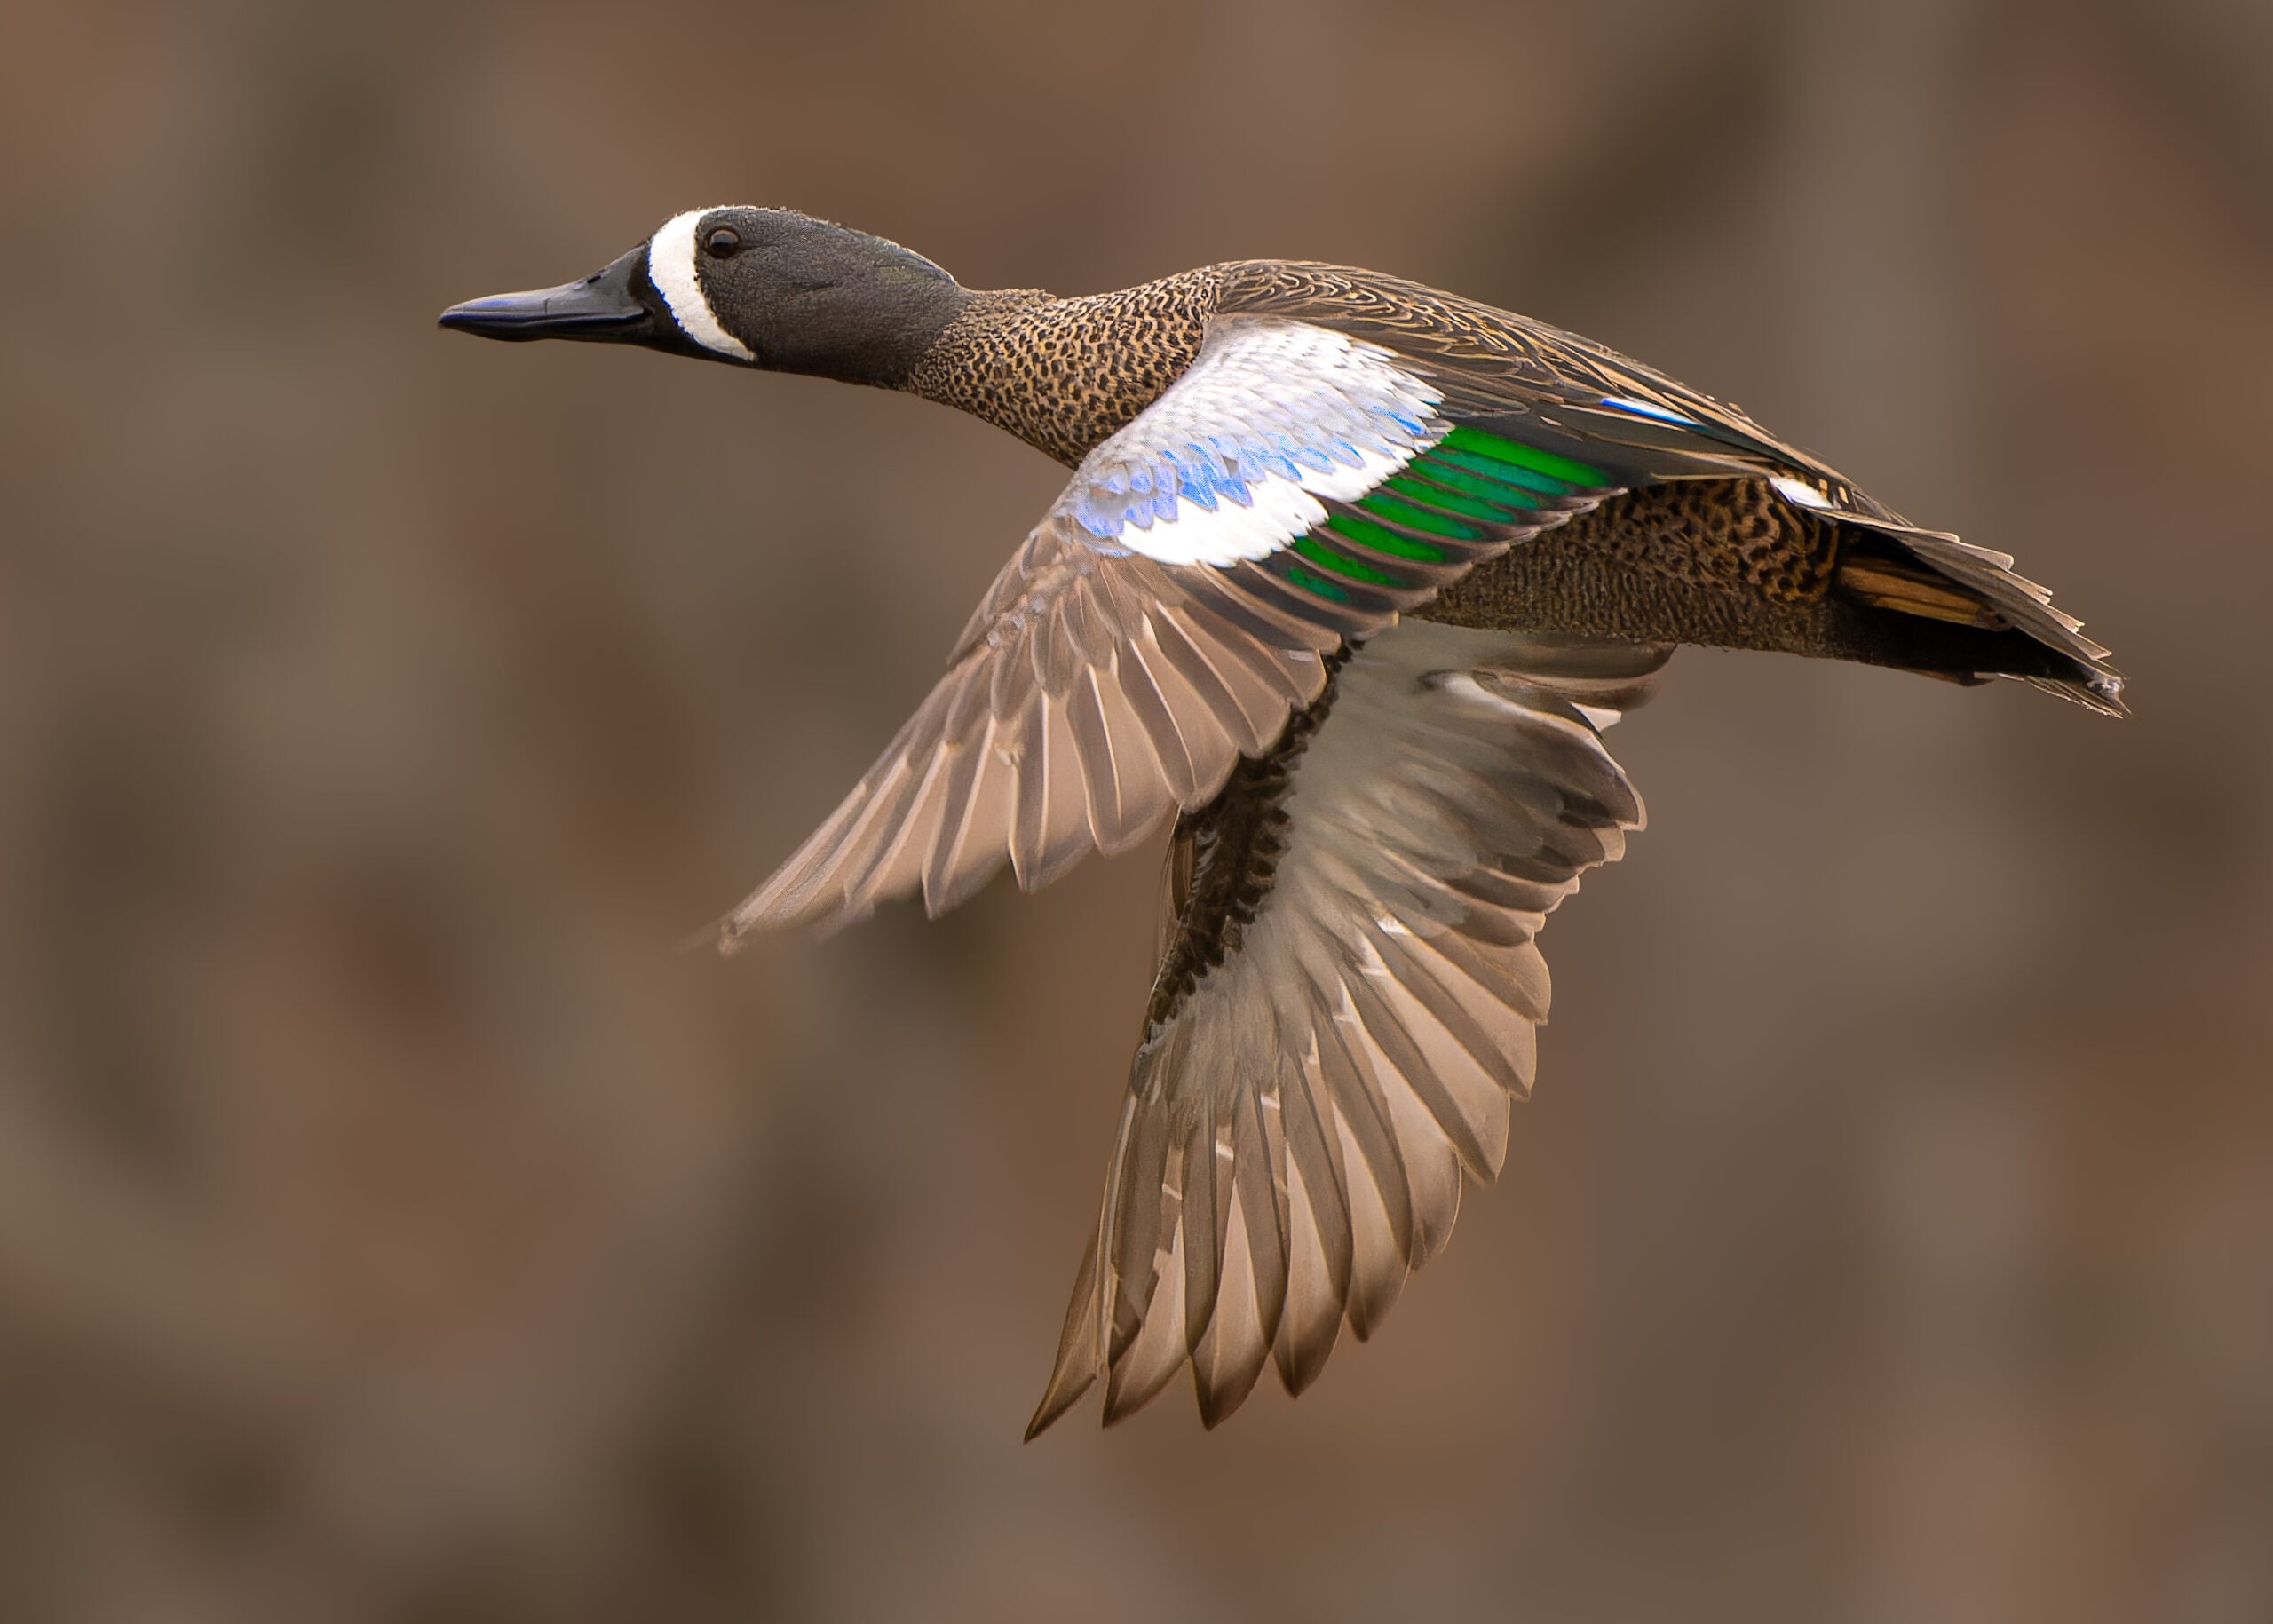 A bluewing teal flying low over water with woods in background